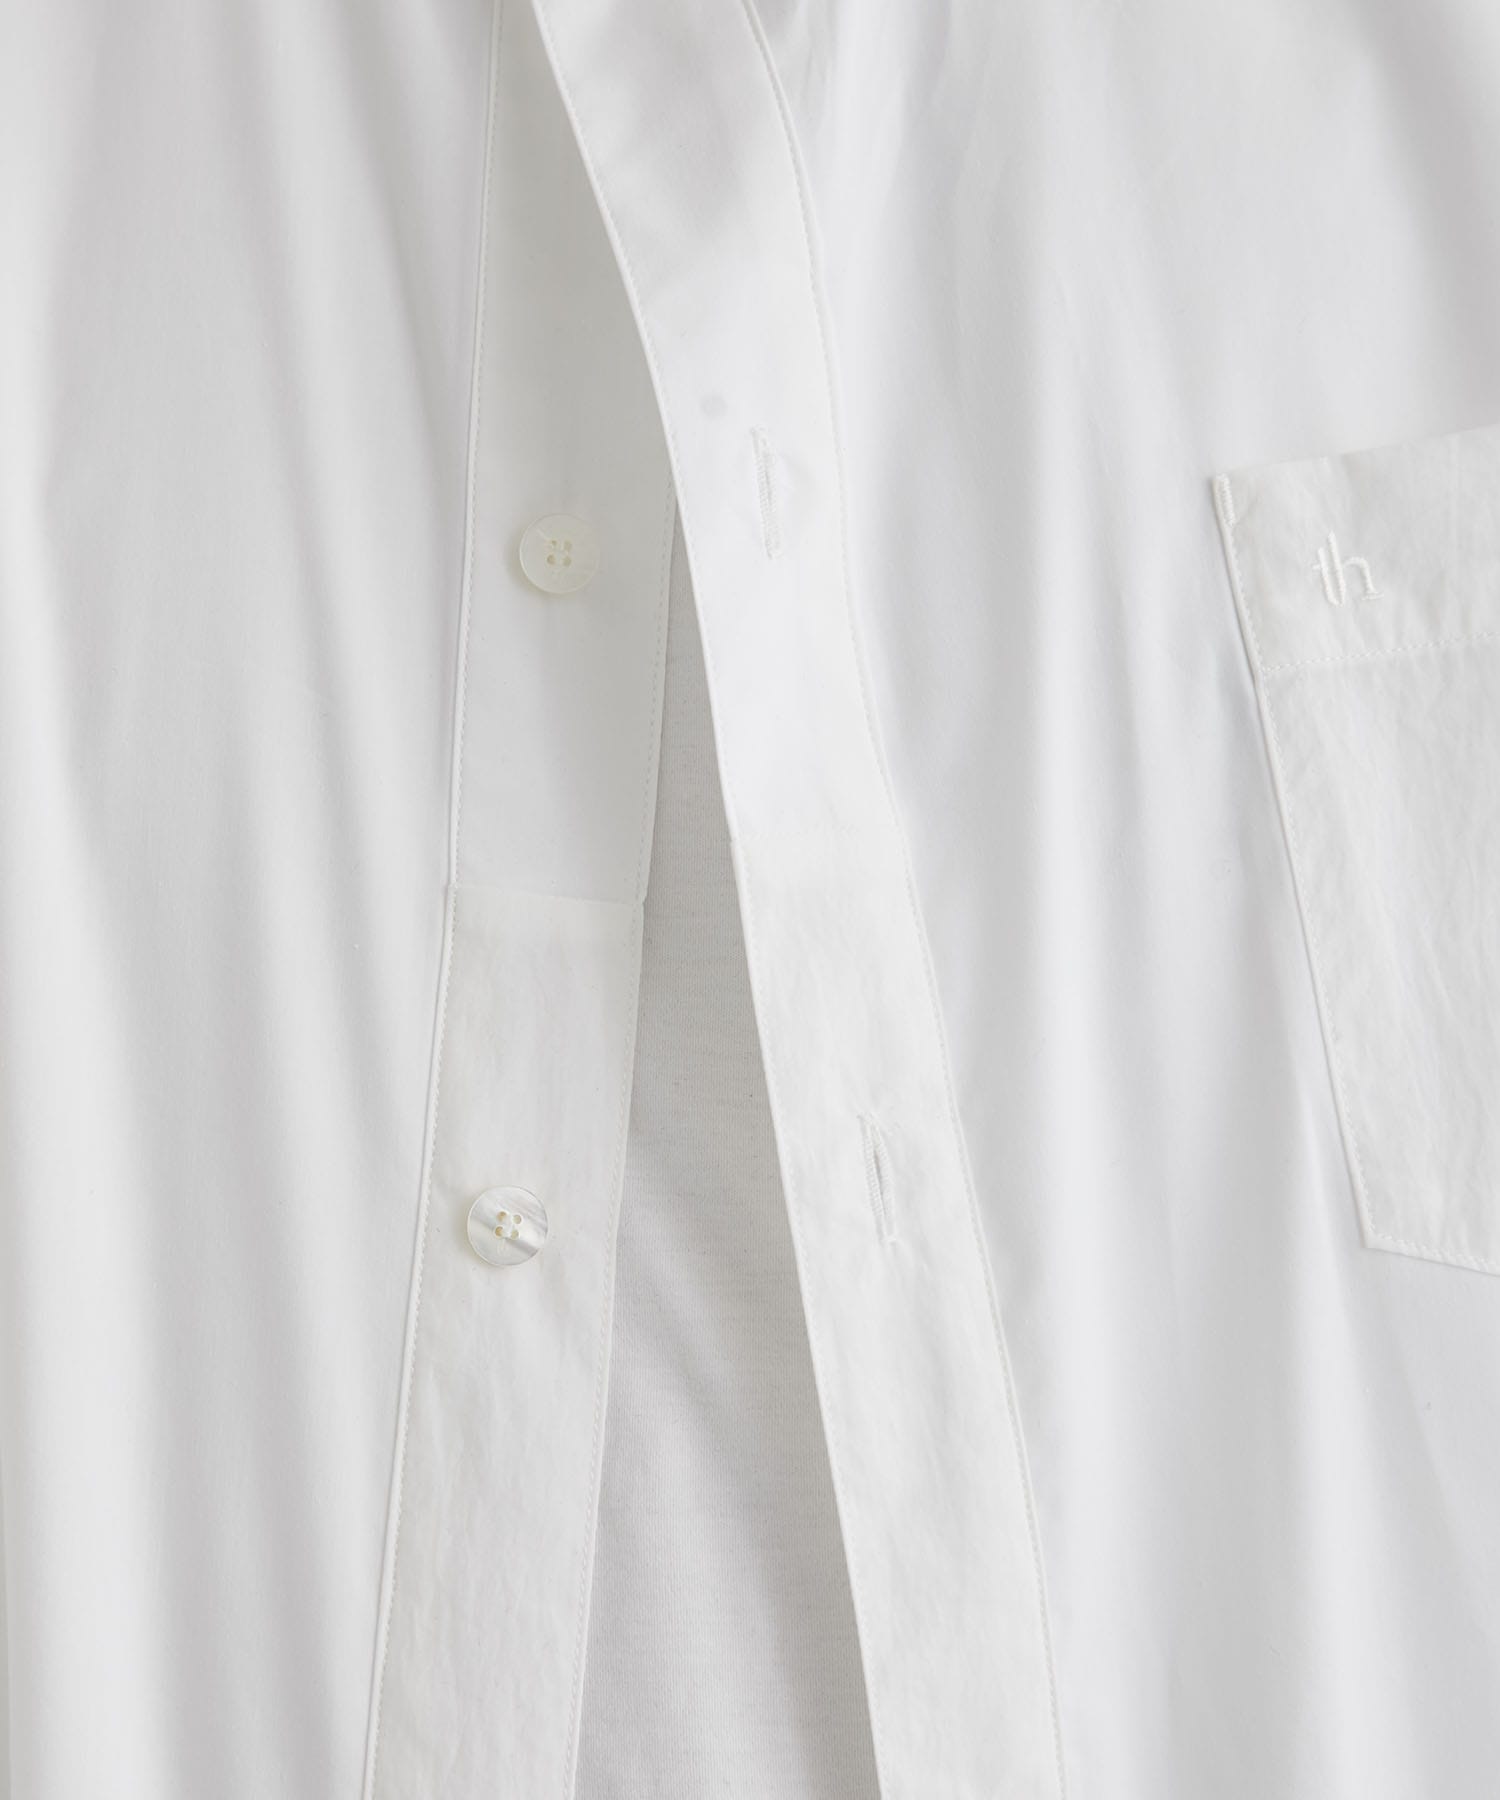 Sports Mixed Shirt (MID)(1 WHITE): th products: MEN｜THE TOKYO